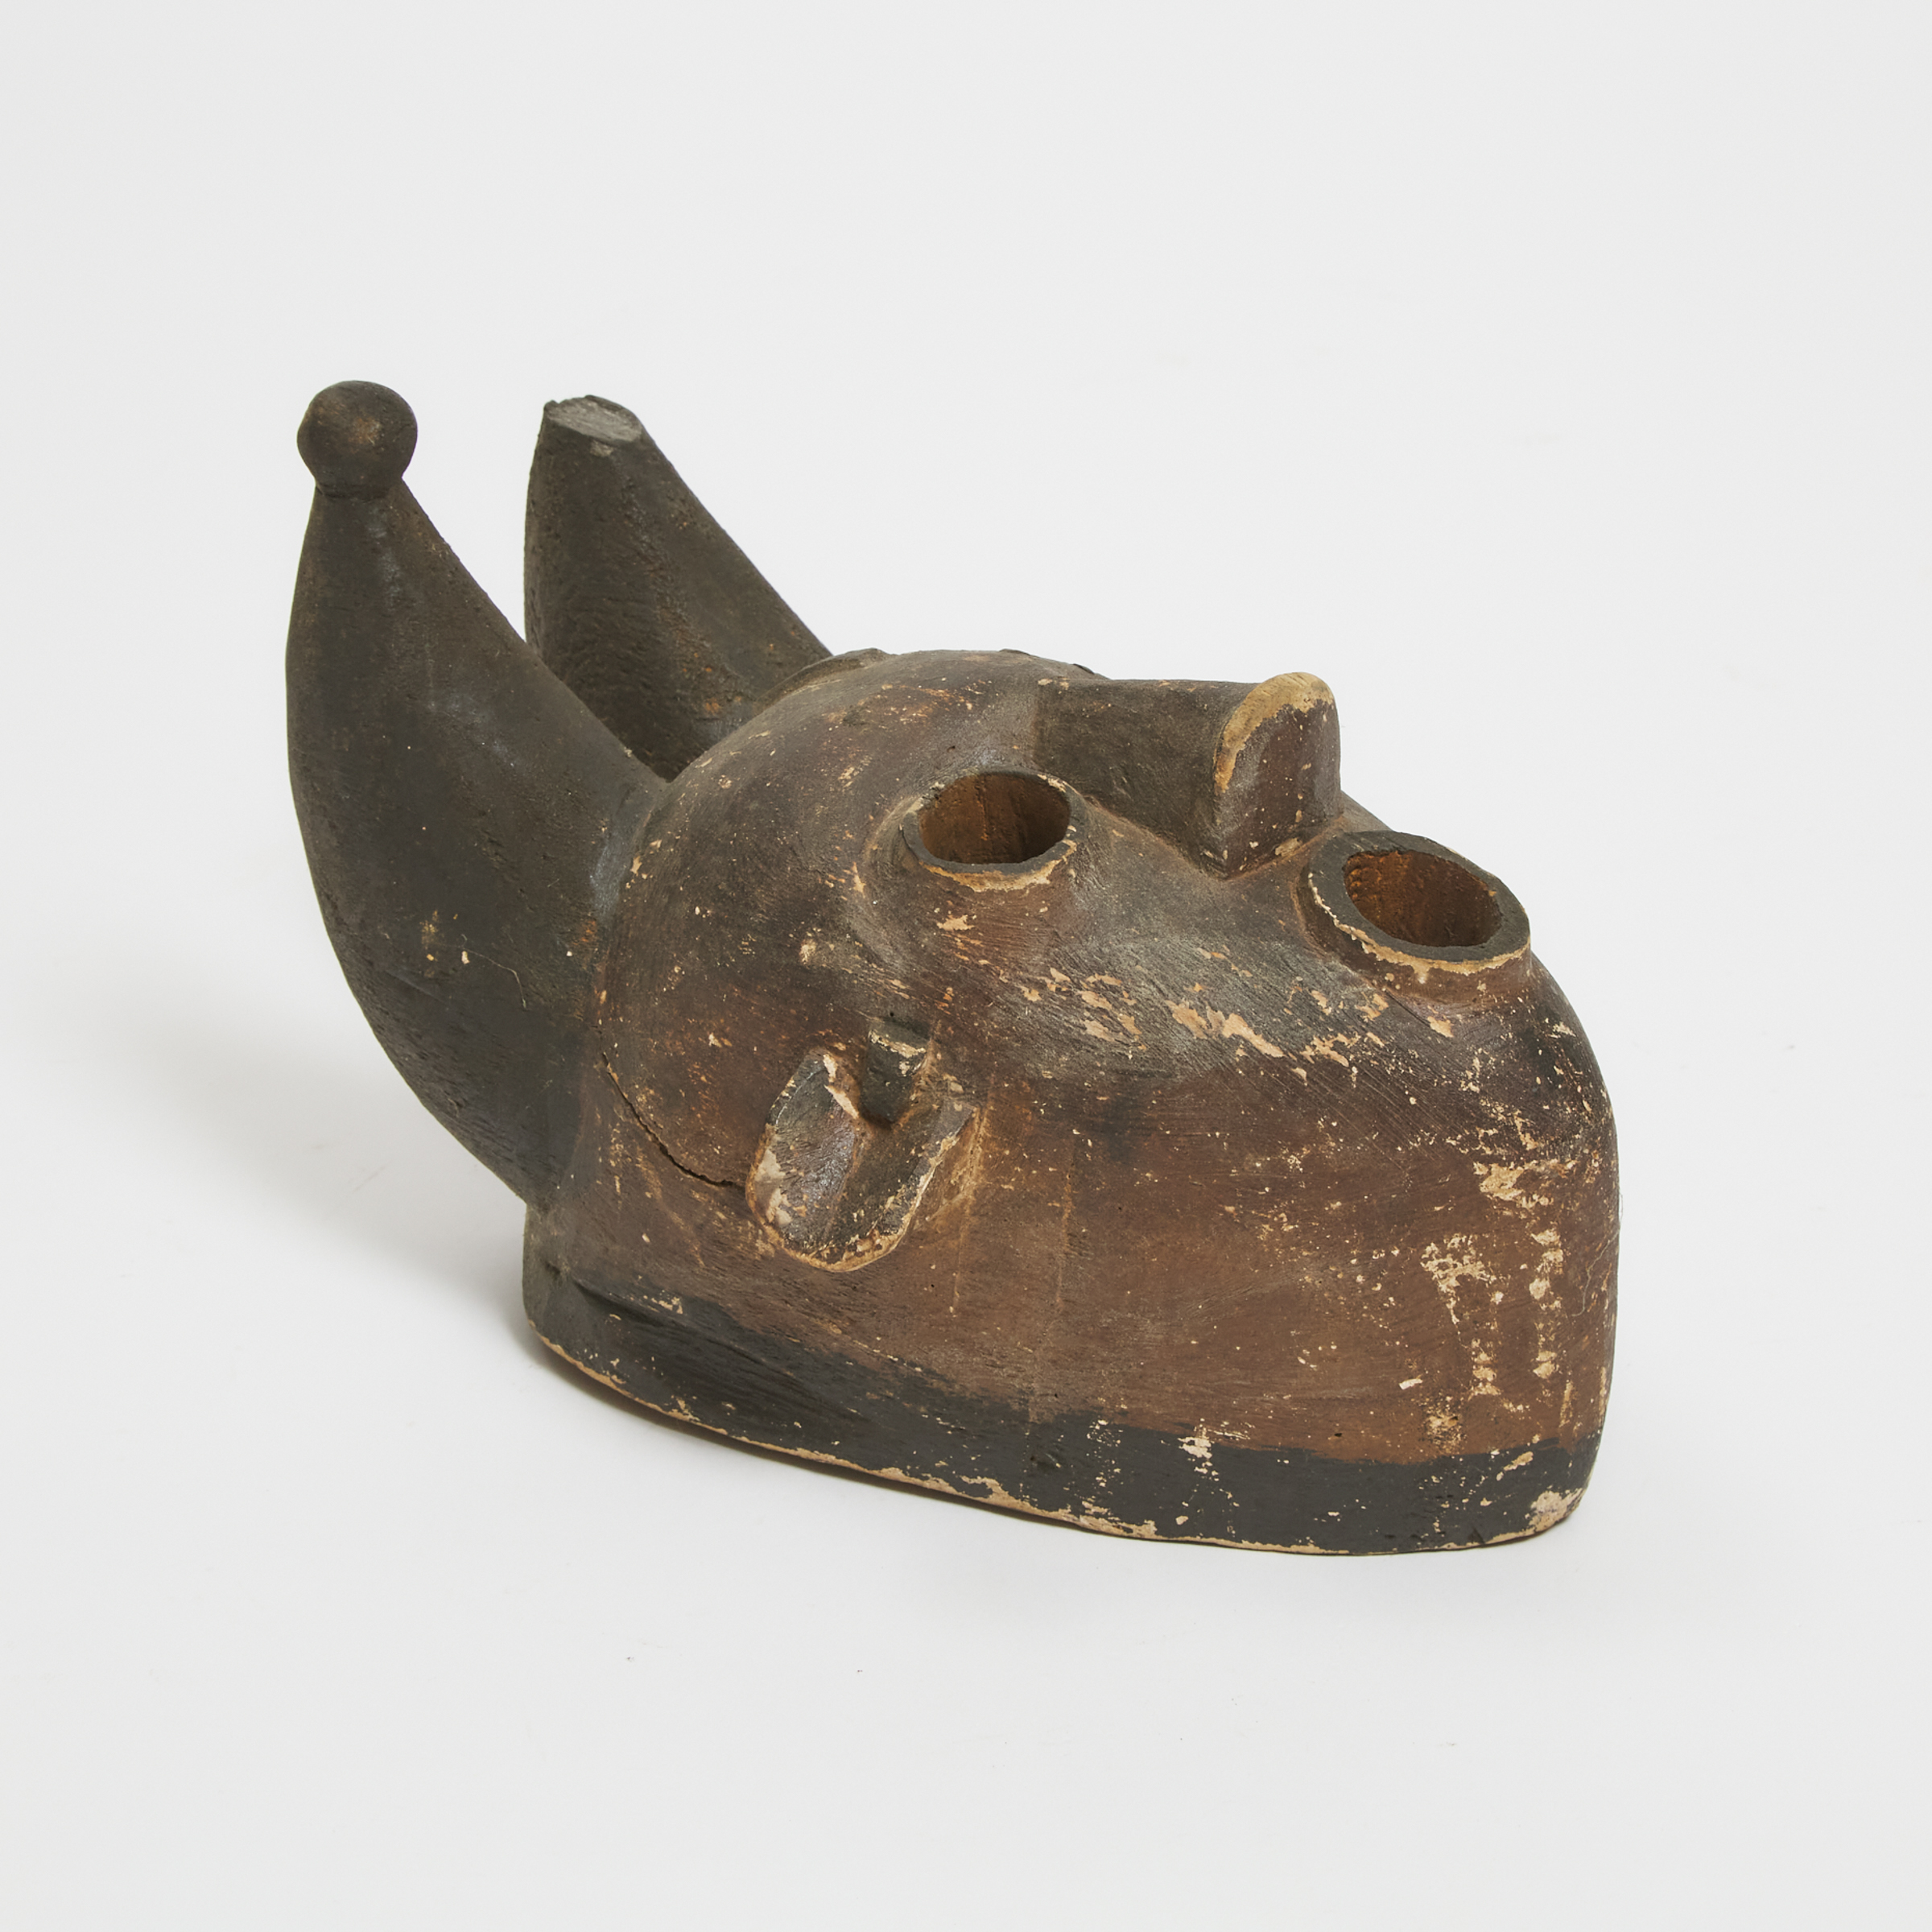 Unidentifed African Mask, Ogoni Style, possibly Nigeria, mid to late 20th century